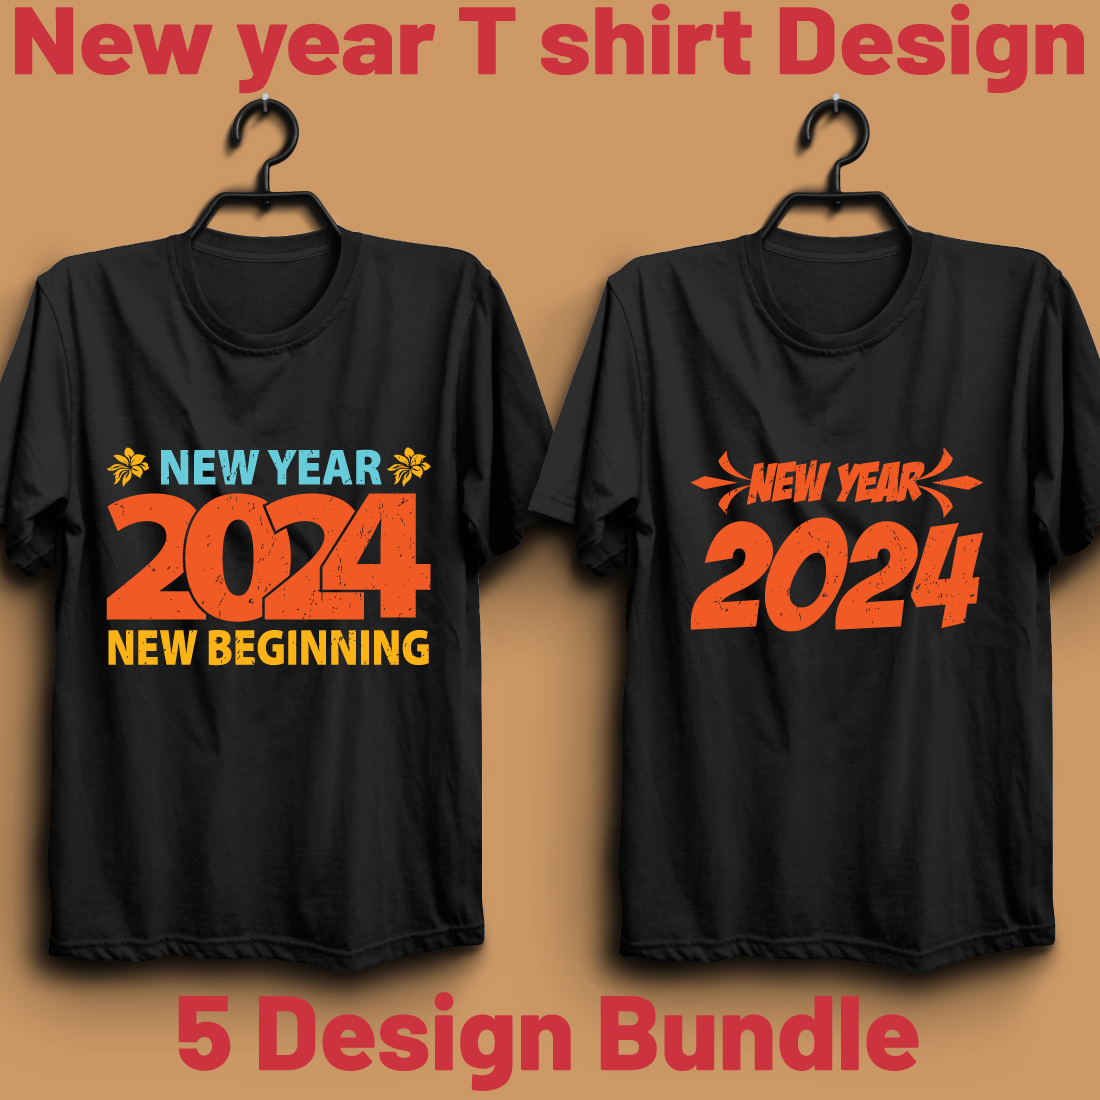 New year T shirt Design Bundle cover image.